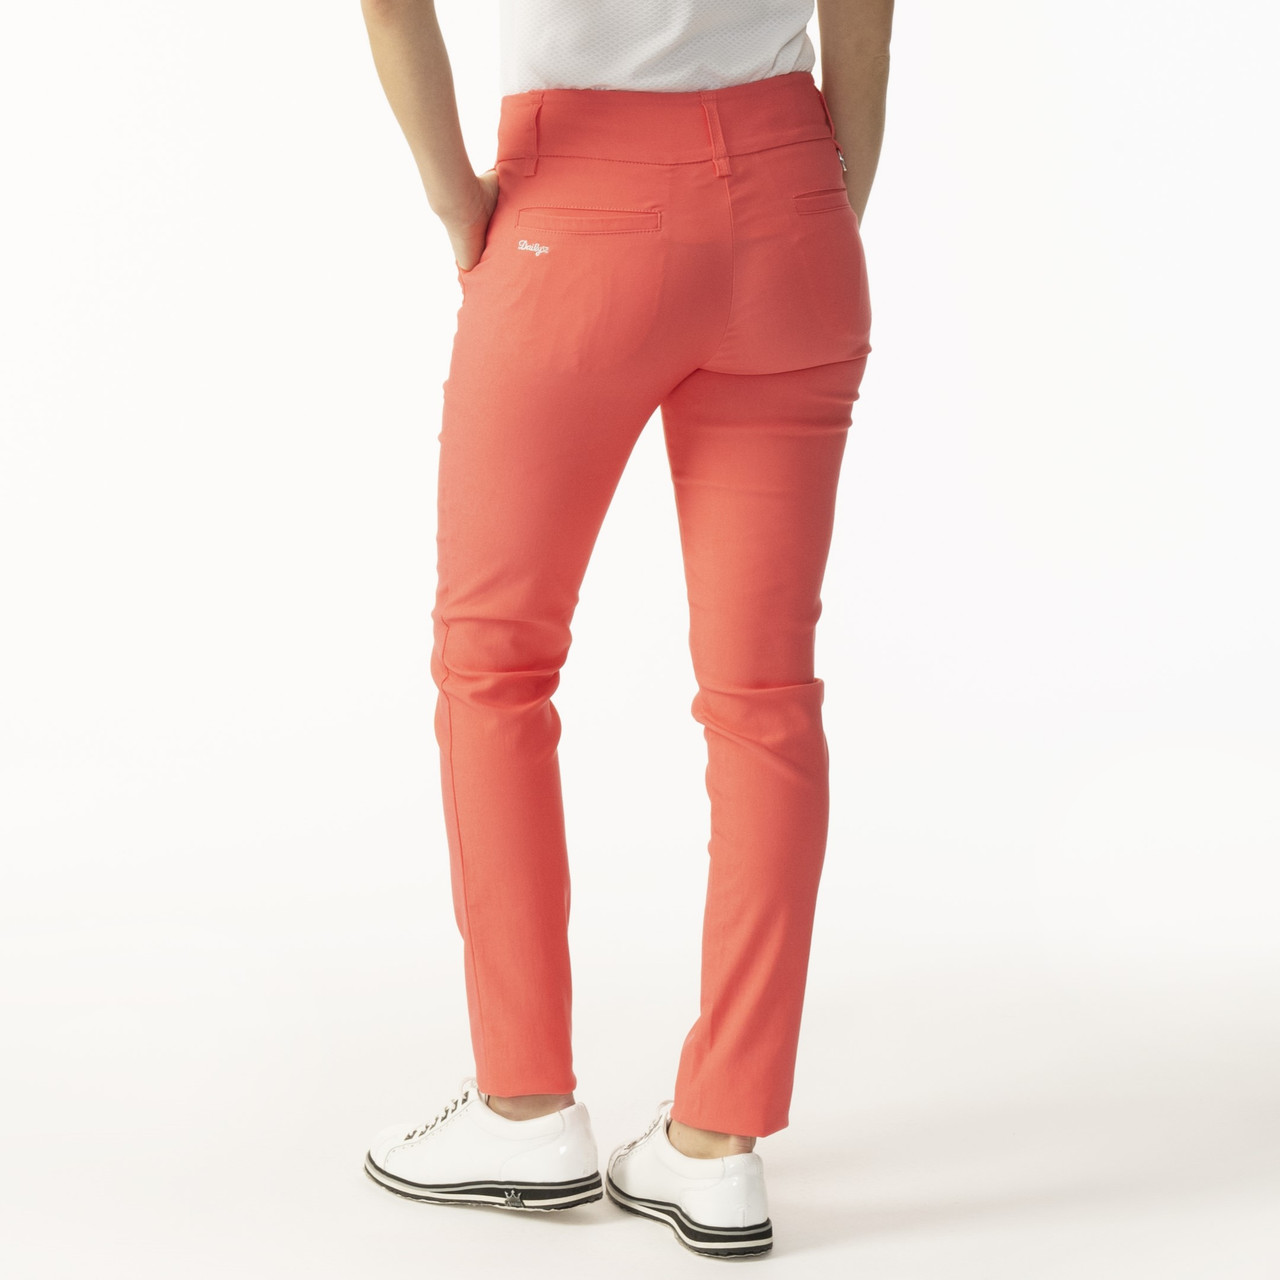 Daily Sports MAGIC PANTS 29 INCH 7/8 pants in coral buy online - Golf House